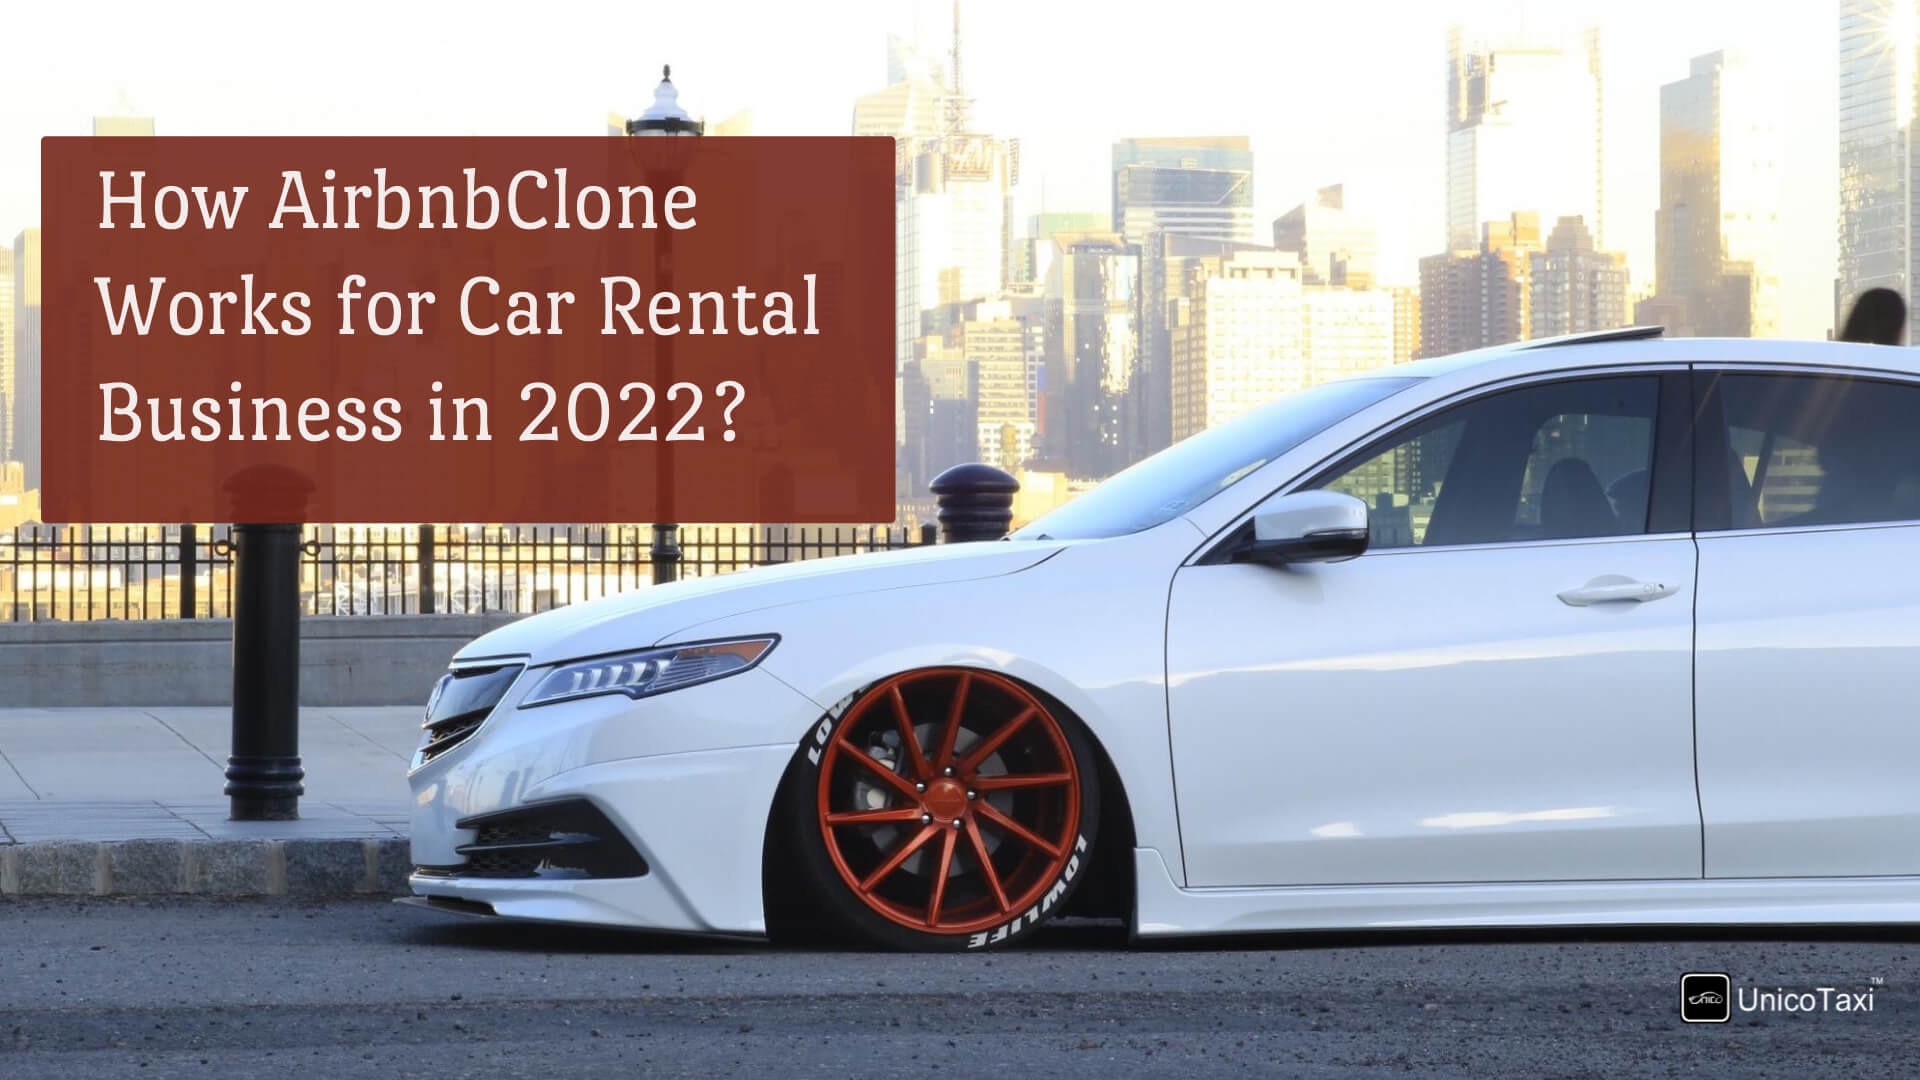 How Airbnb Clone Works for Car Rental Business in 2022?